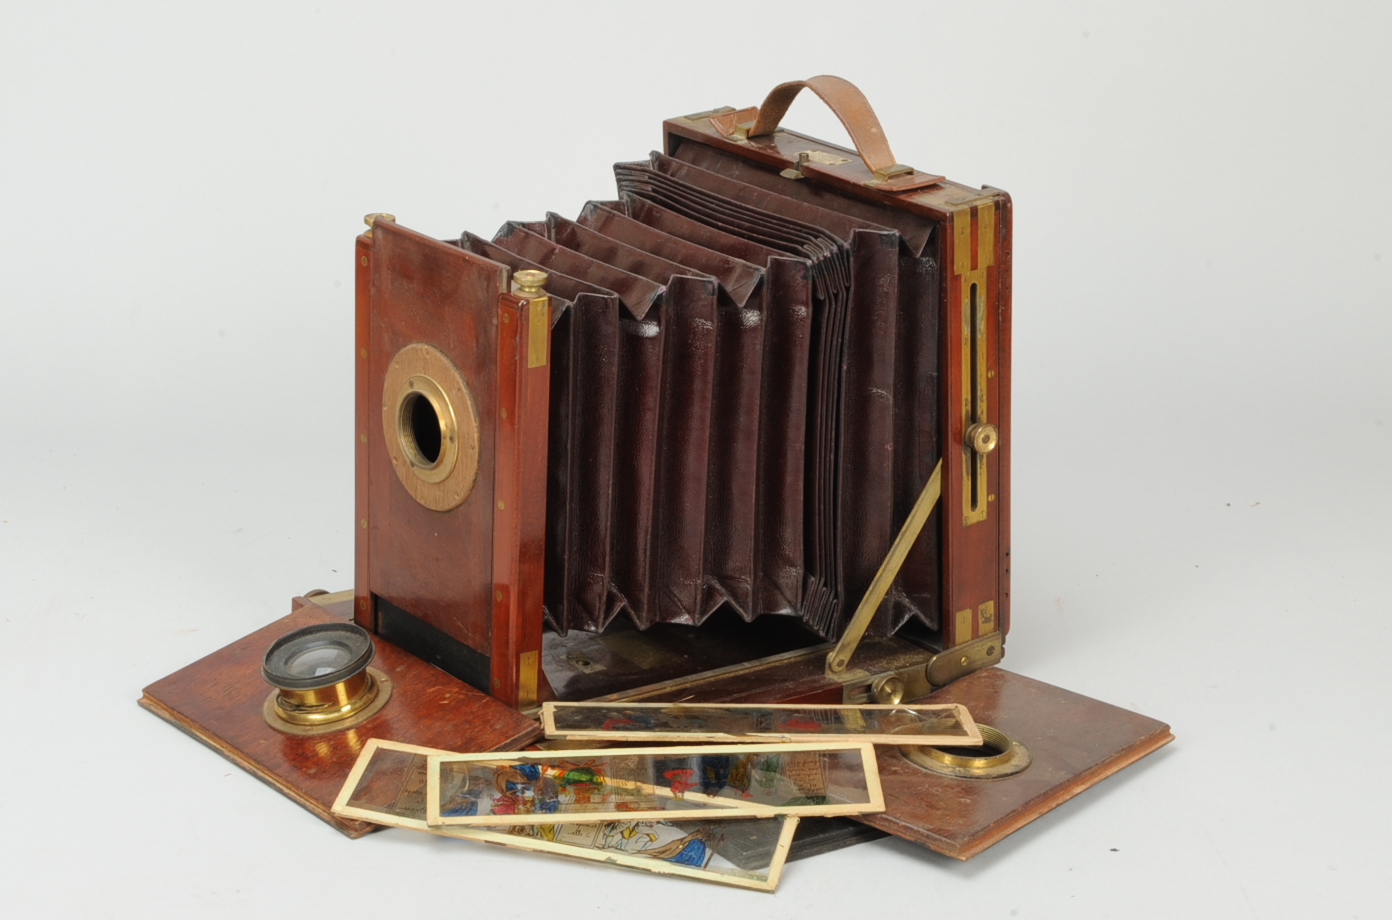 A Hare Whole Plate mahogany and brass-bound Field Camera, circa 1880, probably for transitional